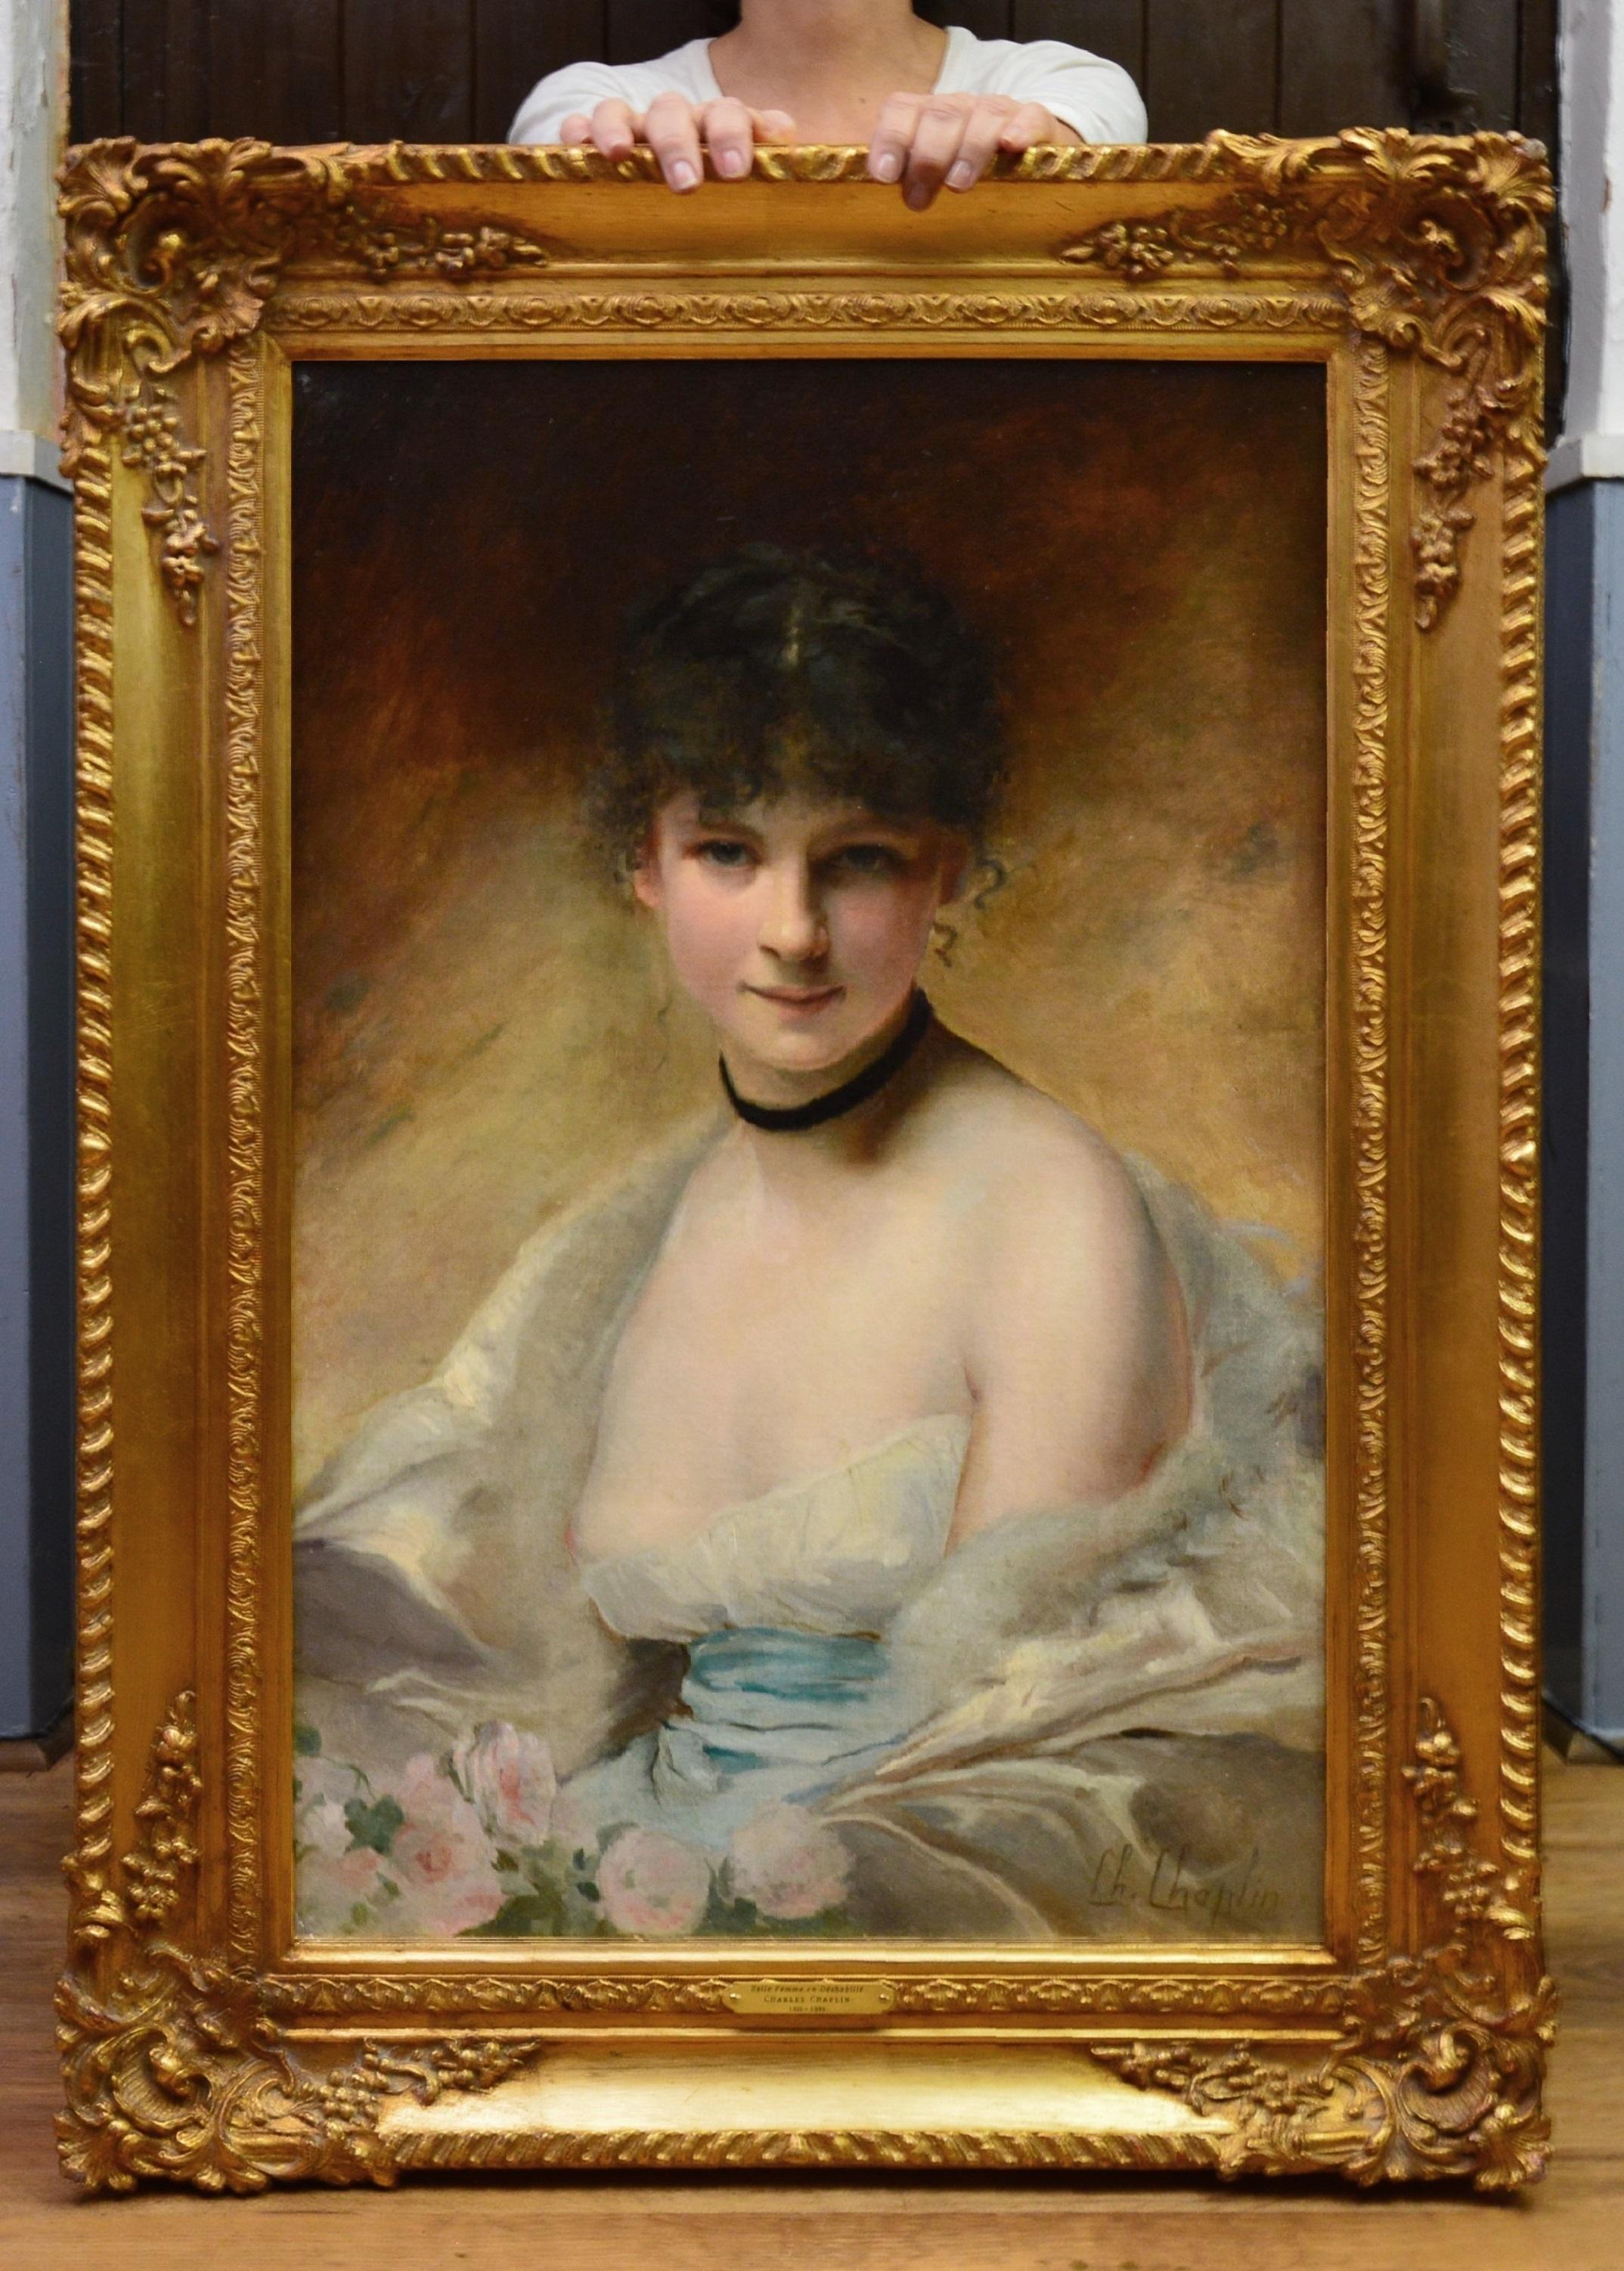 Belle Femme en Déshabillé - 19th Century French Portrait of Young Society Beauty - Painting by Charles Joshua Chaplin